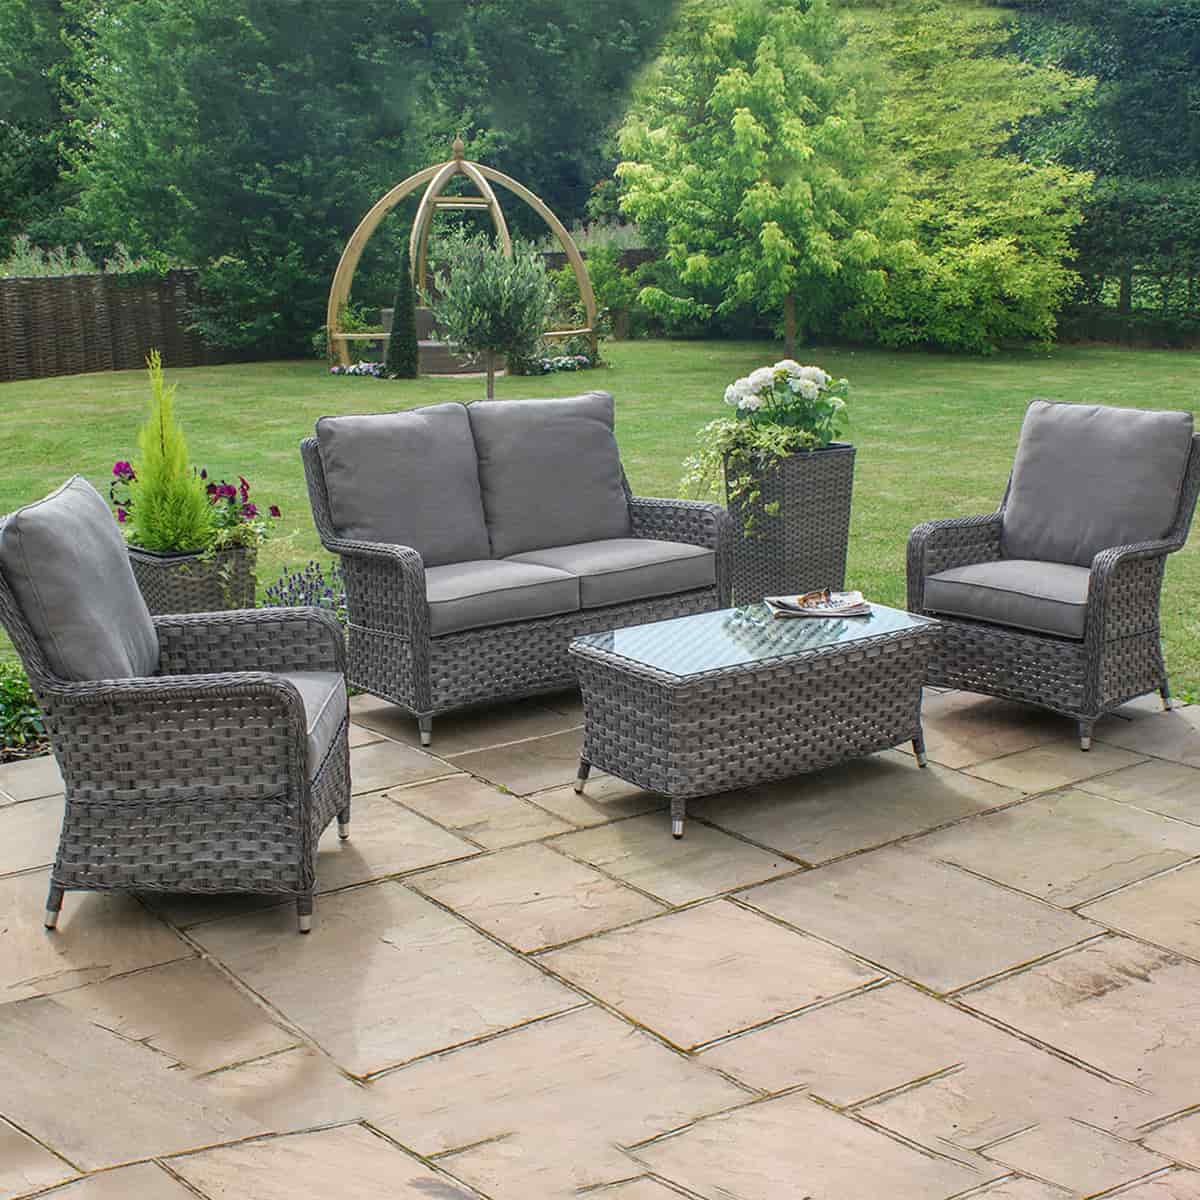 Grey rattan high back 2 seat sofa set with two chairs and a matching coffee table